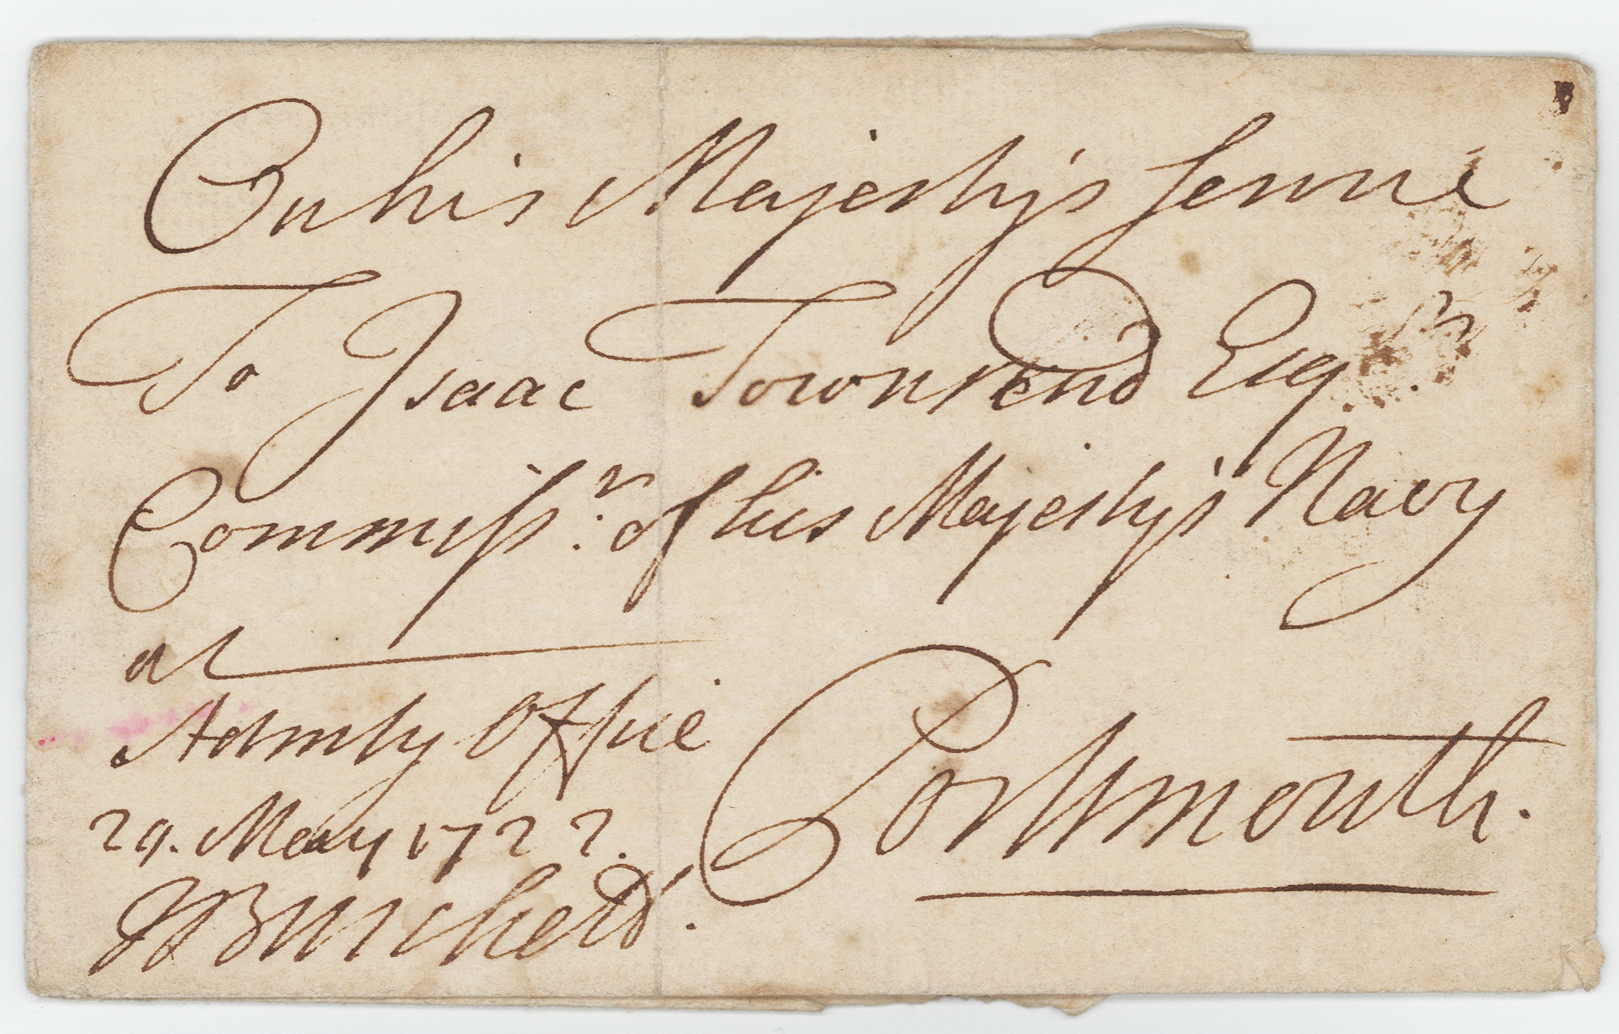 GB - early historical cover sent 29 May 1727 by Josiah Burchett, Admiralty Office (hand signed by